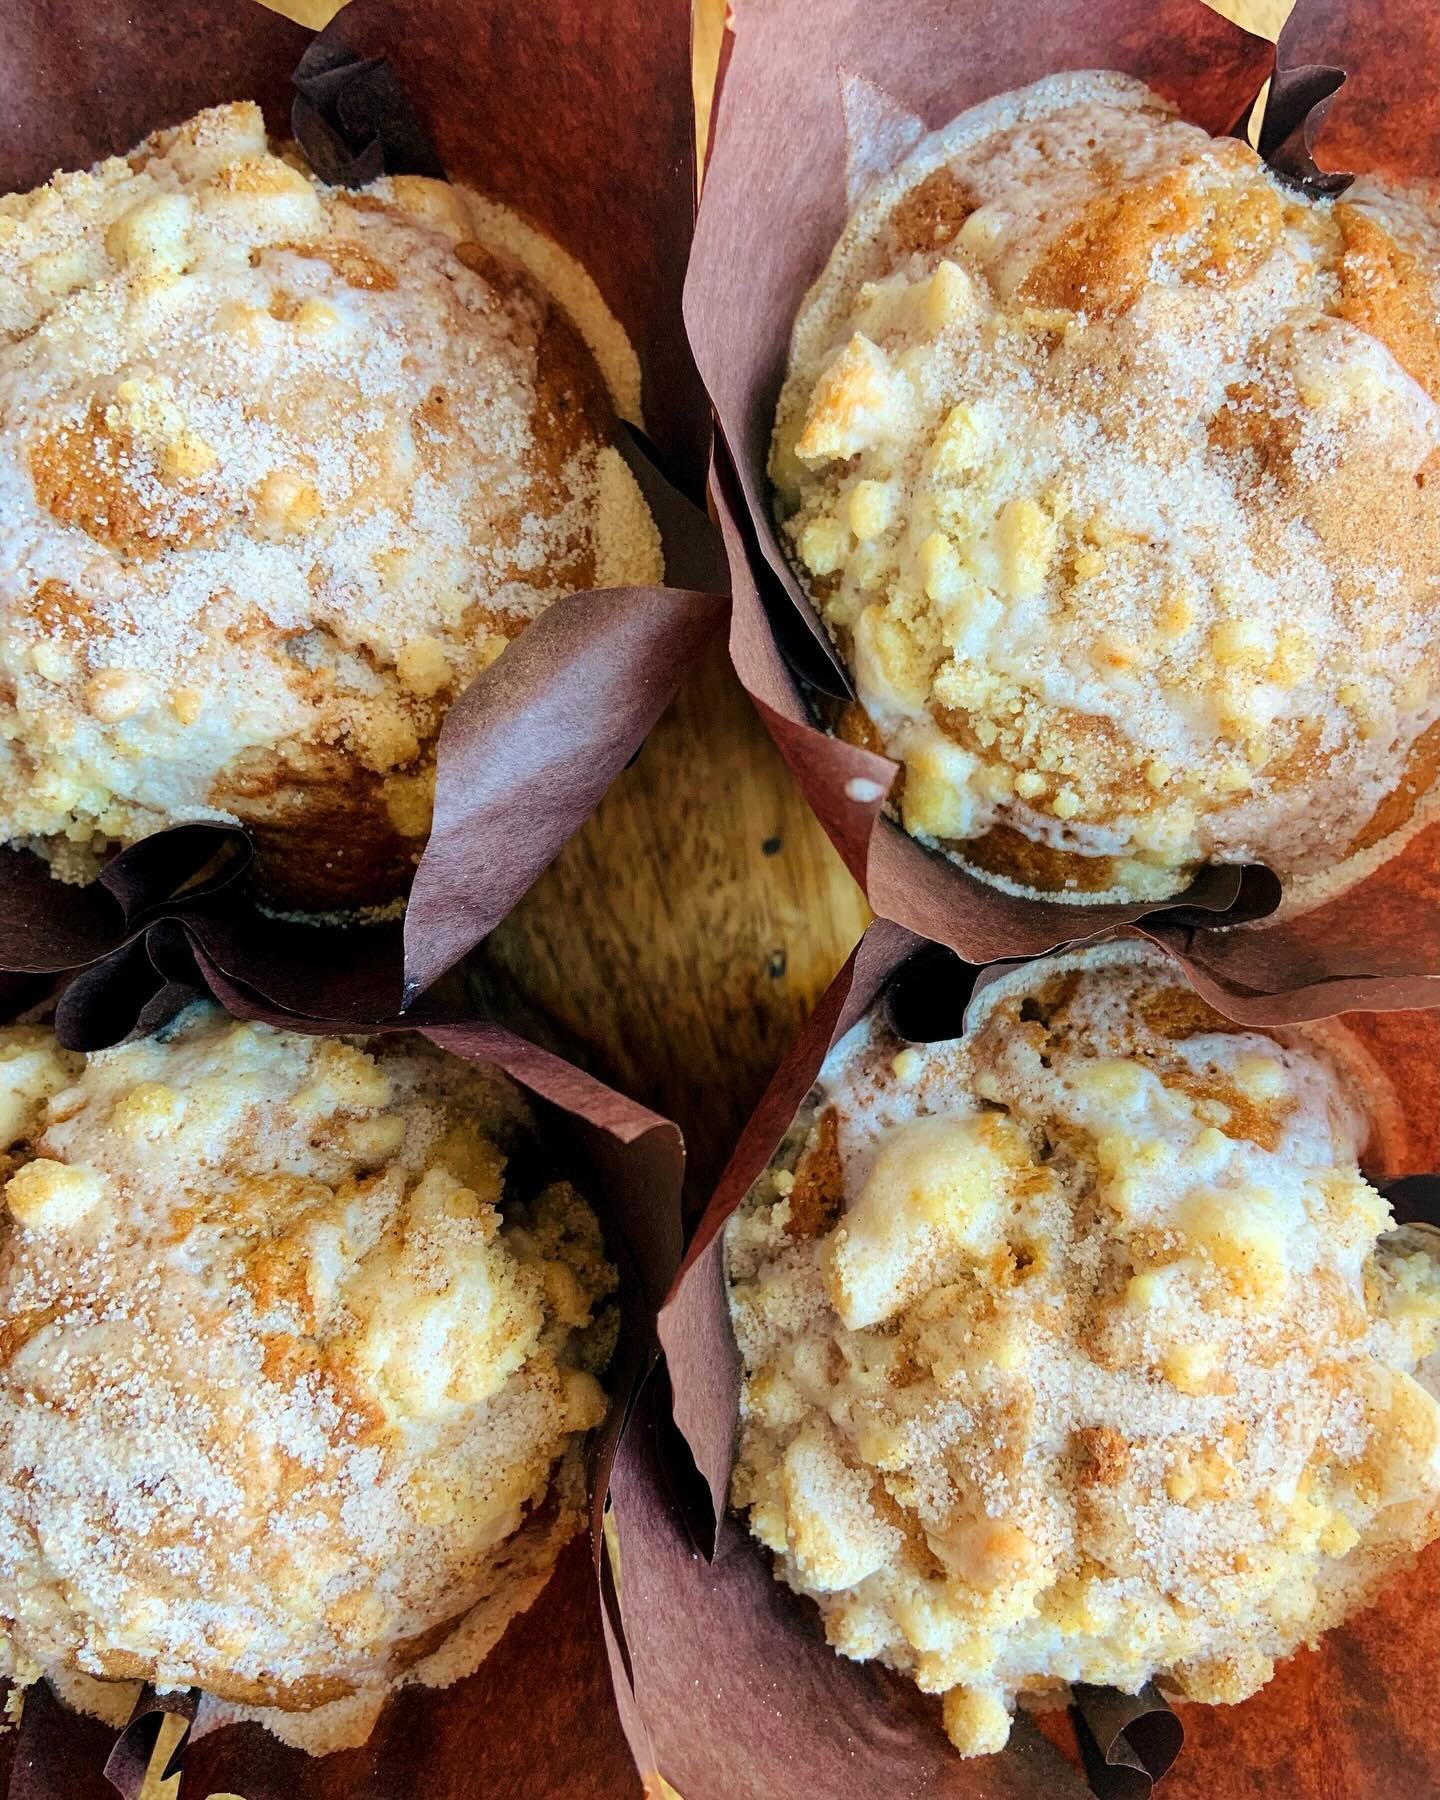 This week&rsquo;s muffin feature should not be missed! 😋
Spiced Coffee Cake ☕️
Topped w/ streusel, glaze + cinnamon sugar 

#coffeecake #yegeats #coffeetime #littlebrickyeg